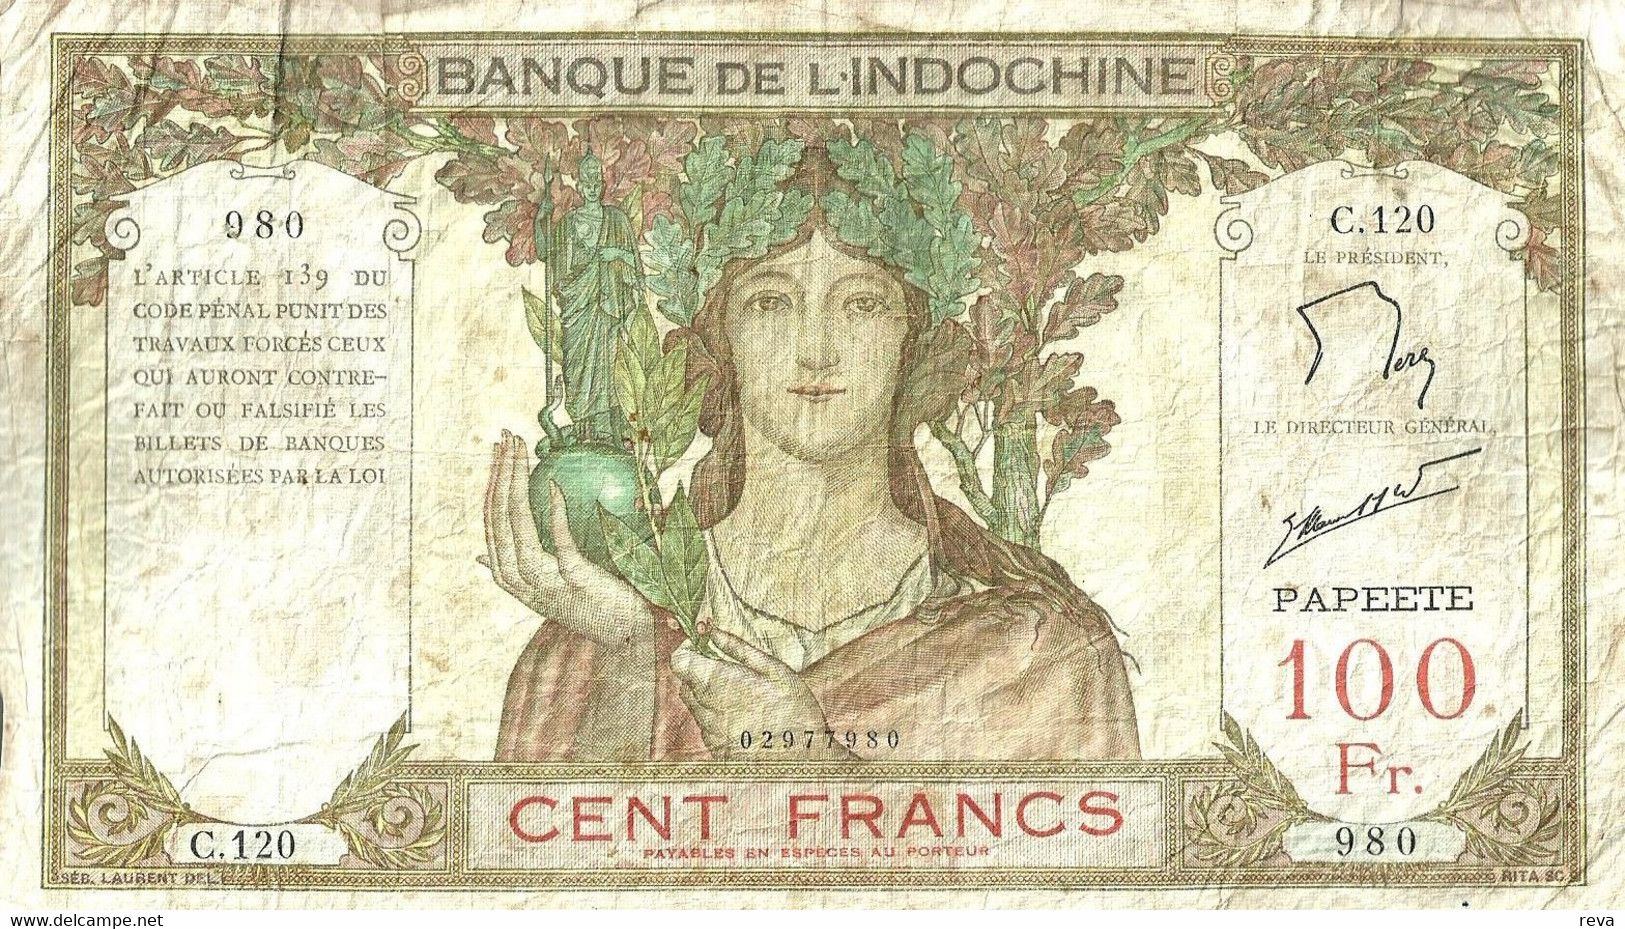 FRENCH POLYNESIA 100 FRANCS BROWN WOMAN HEAD FRONT STATUE BACK NOT DATED(1965) P14d 4th SIG VARIETY F READ DESCRIPTION!! - Papeete (French Polynesia 1914-1985)